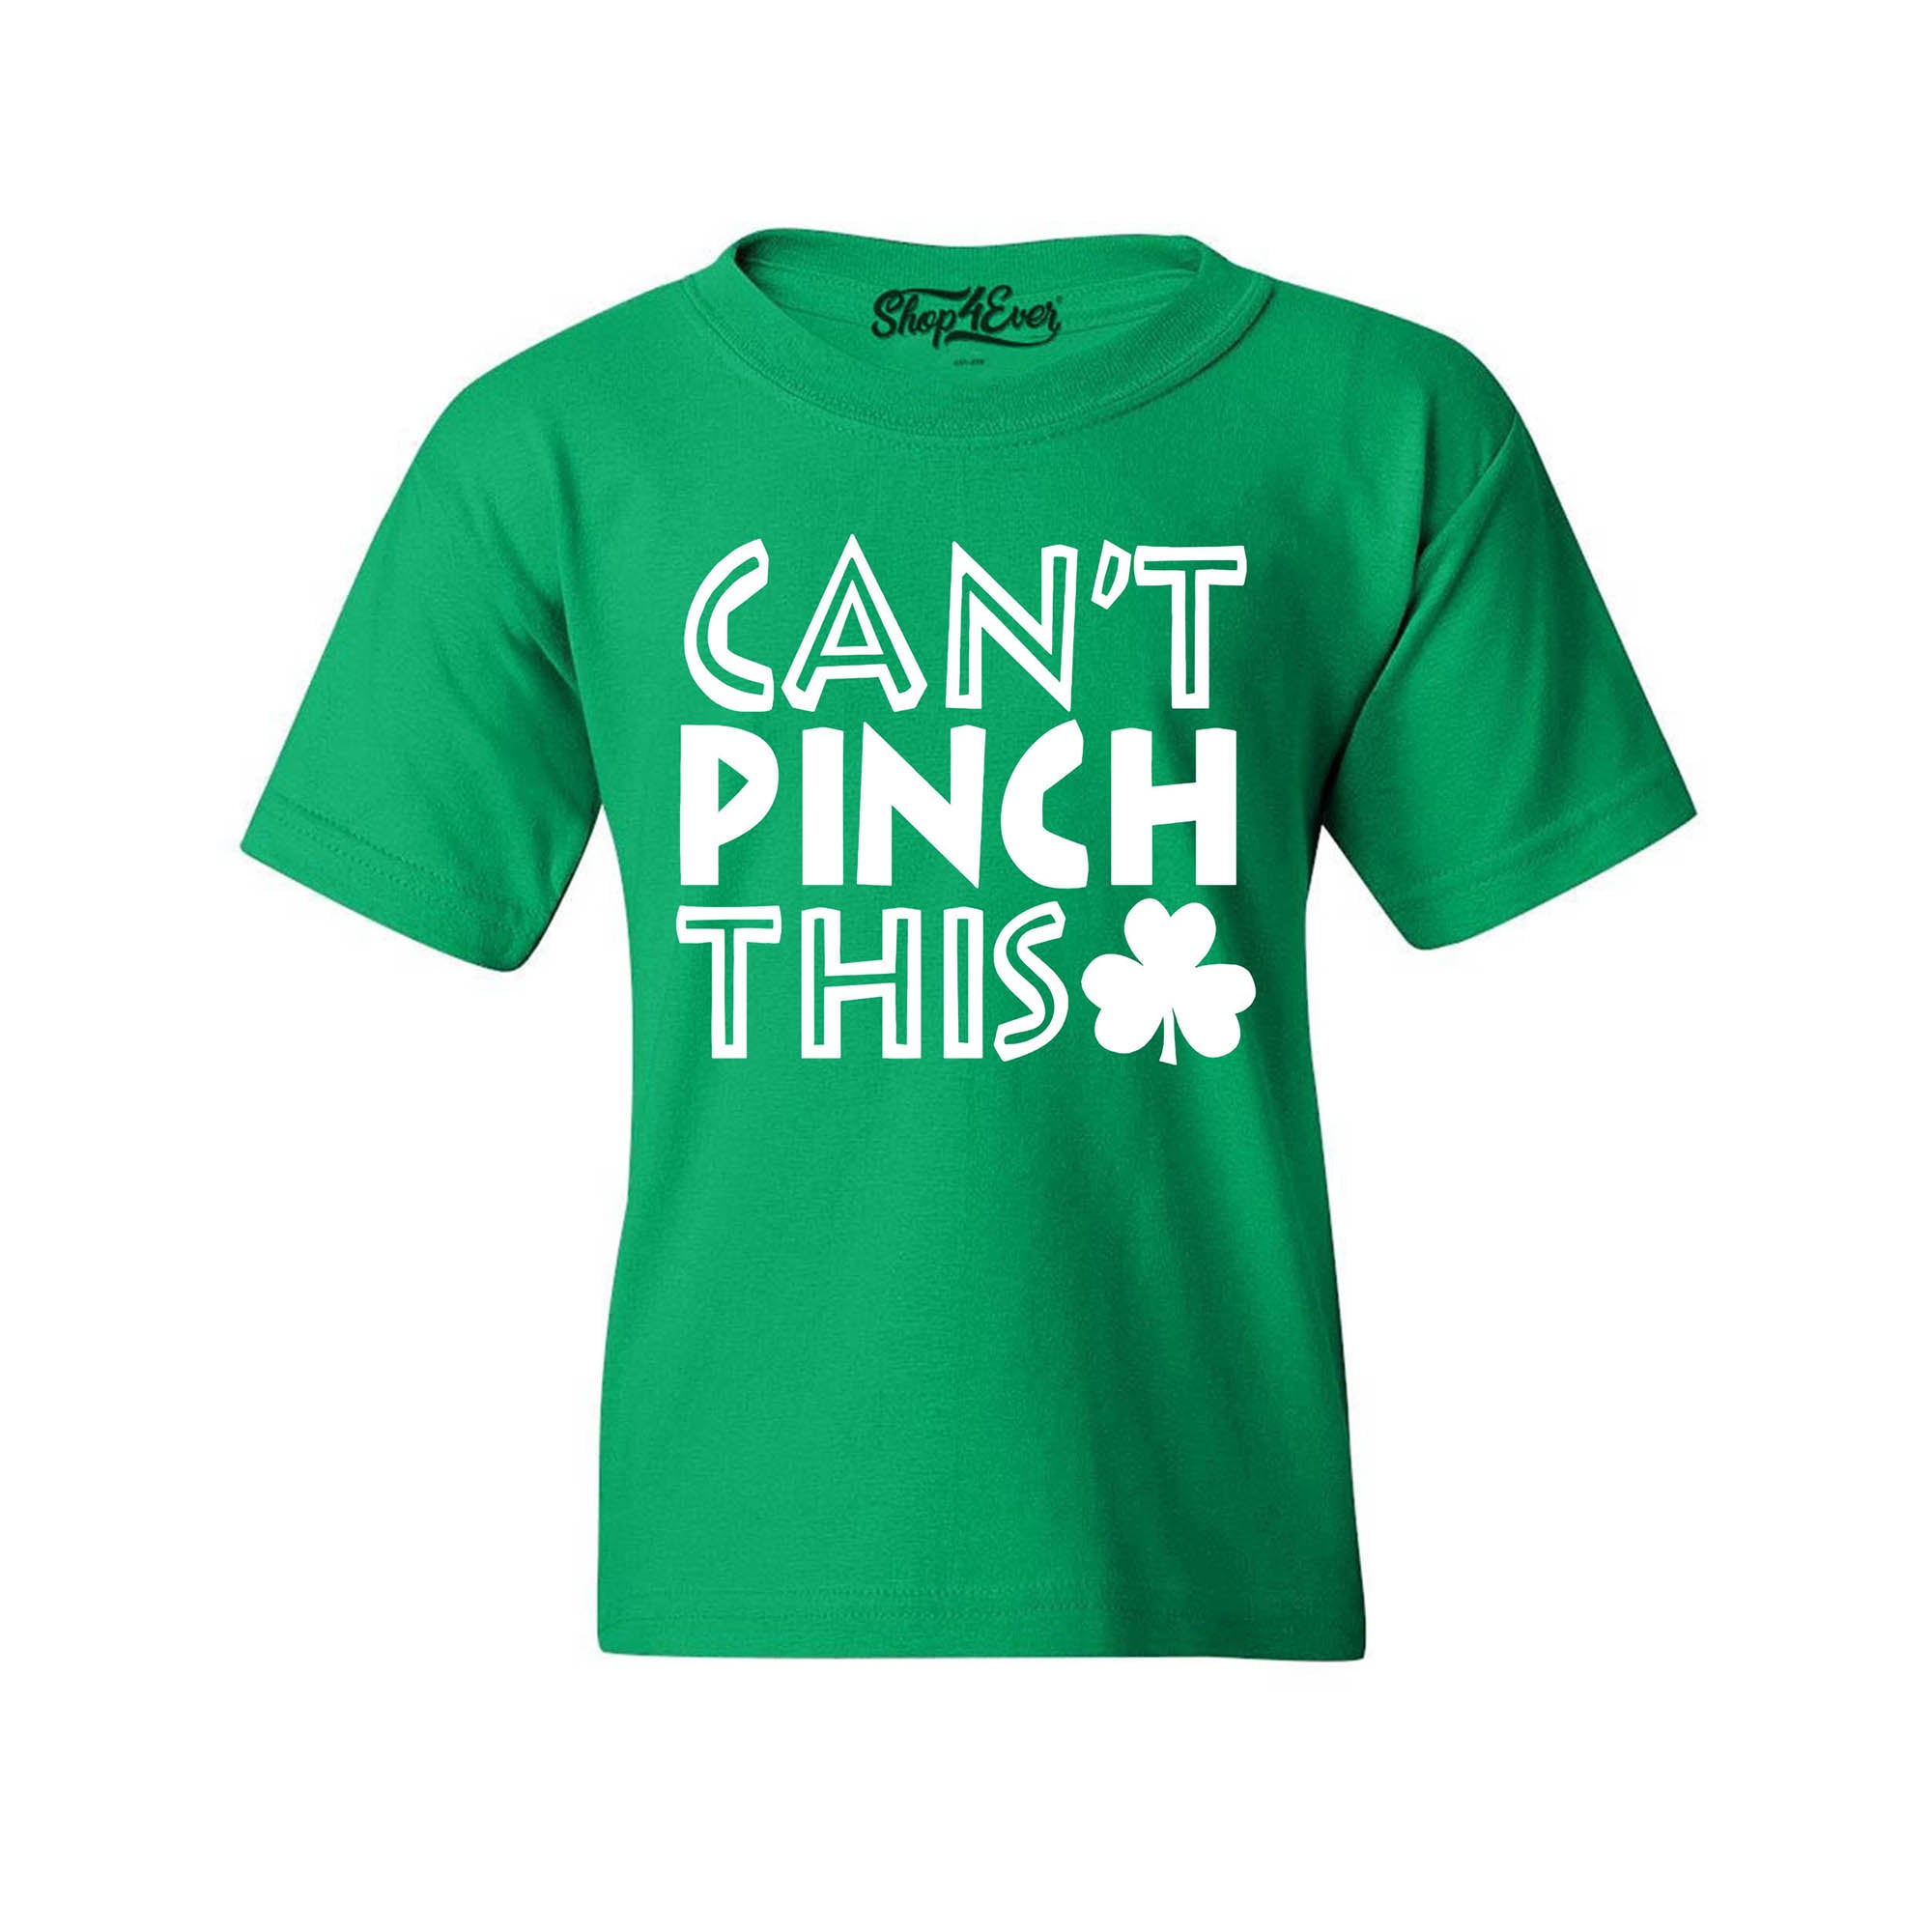 Can't Pinch This St. Patrick's Day Child's T-Shirt Kids Tee